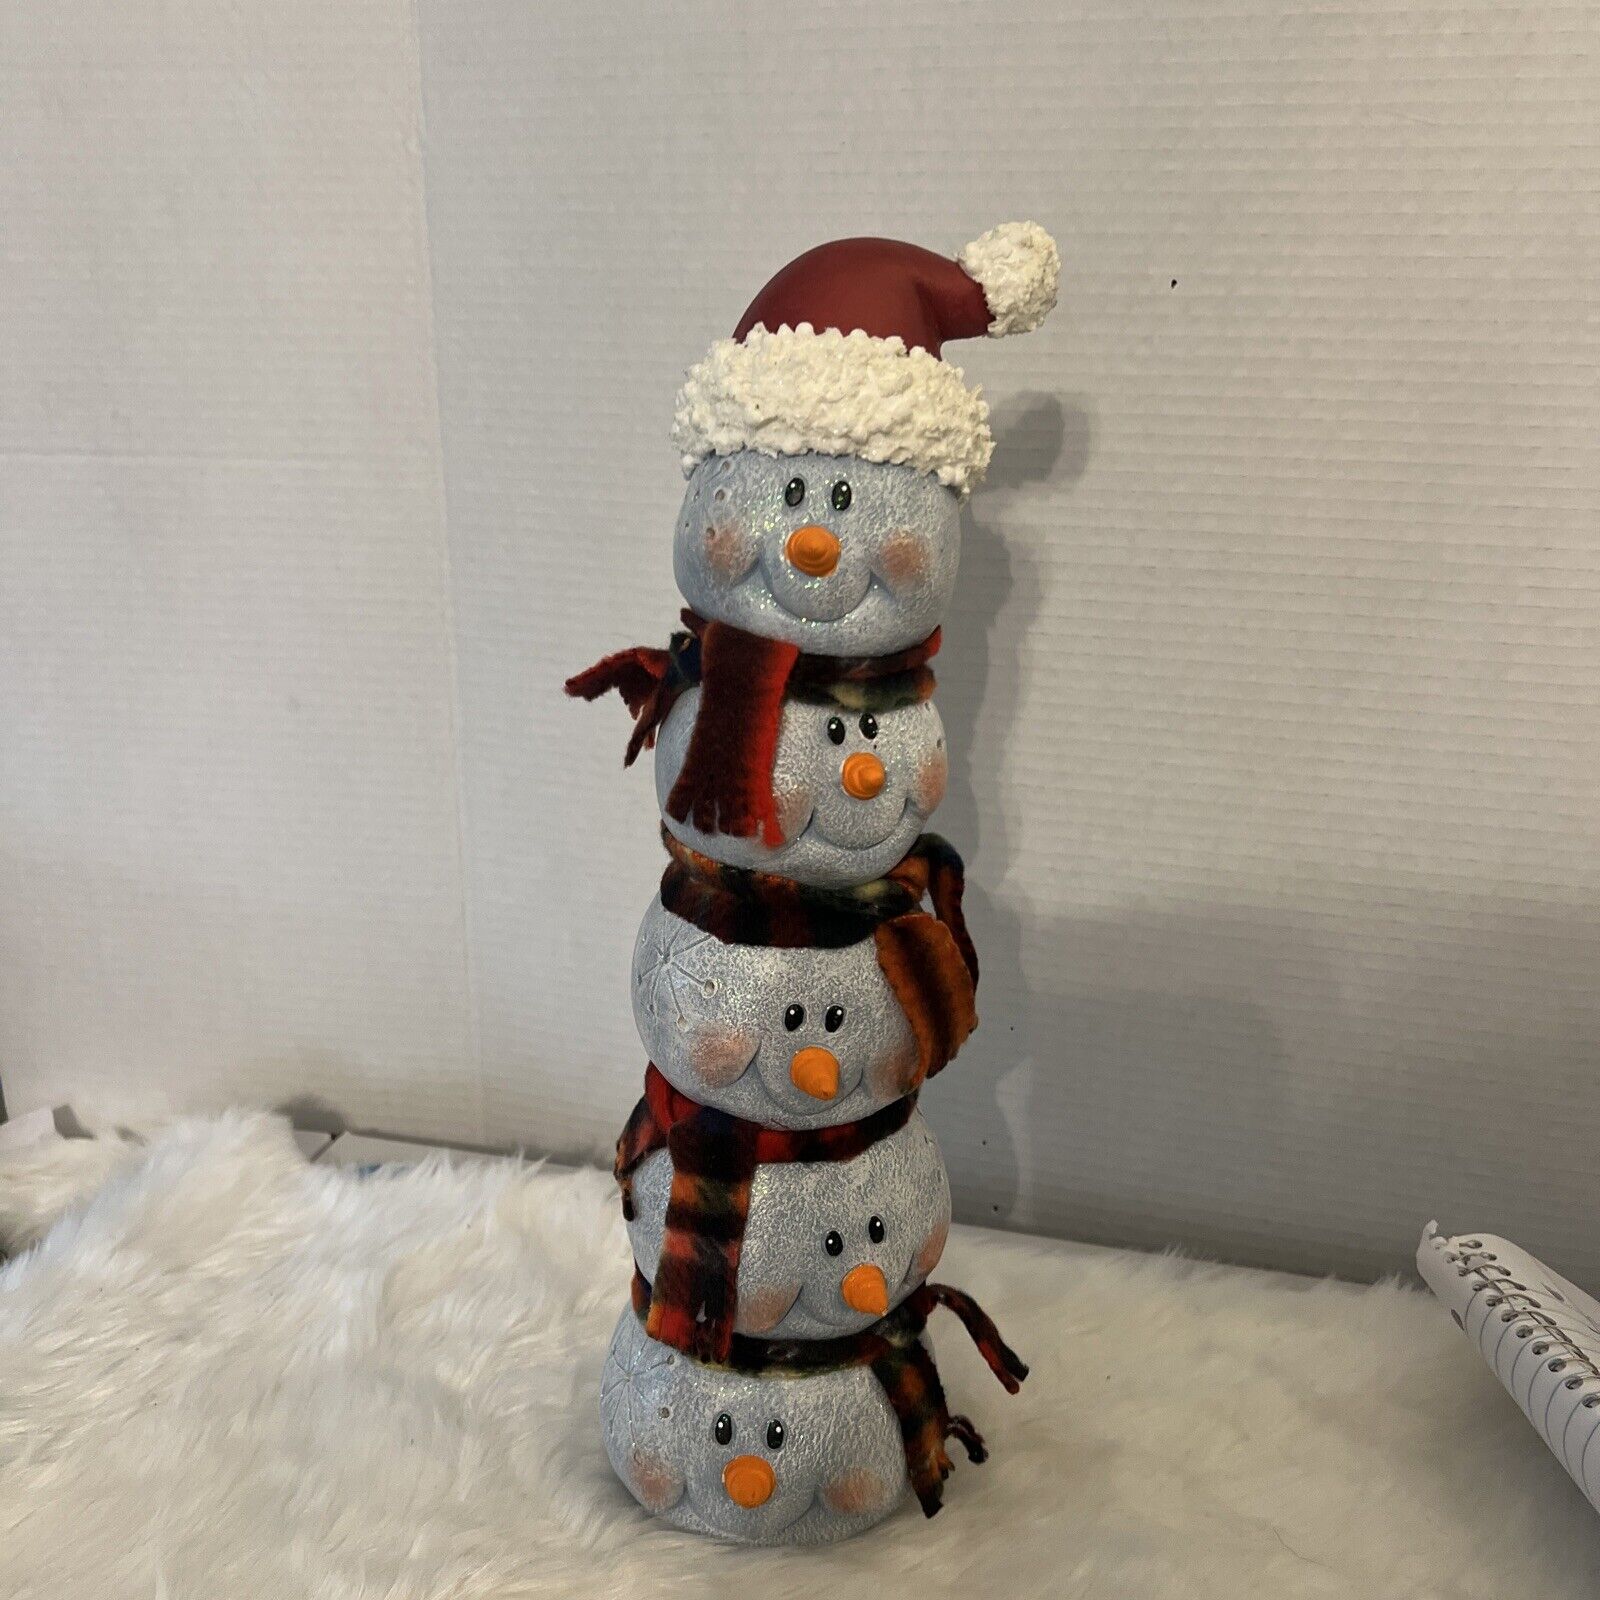 Vintage Ceramic Snowman Stack 15 In Tall 